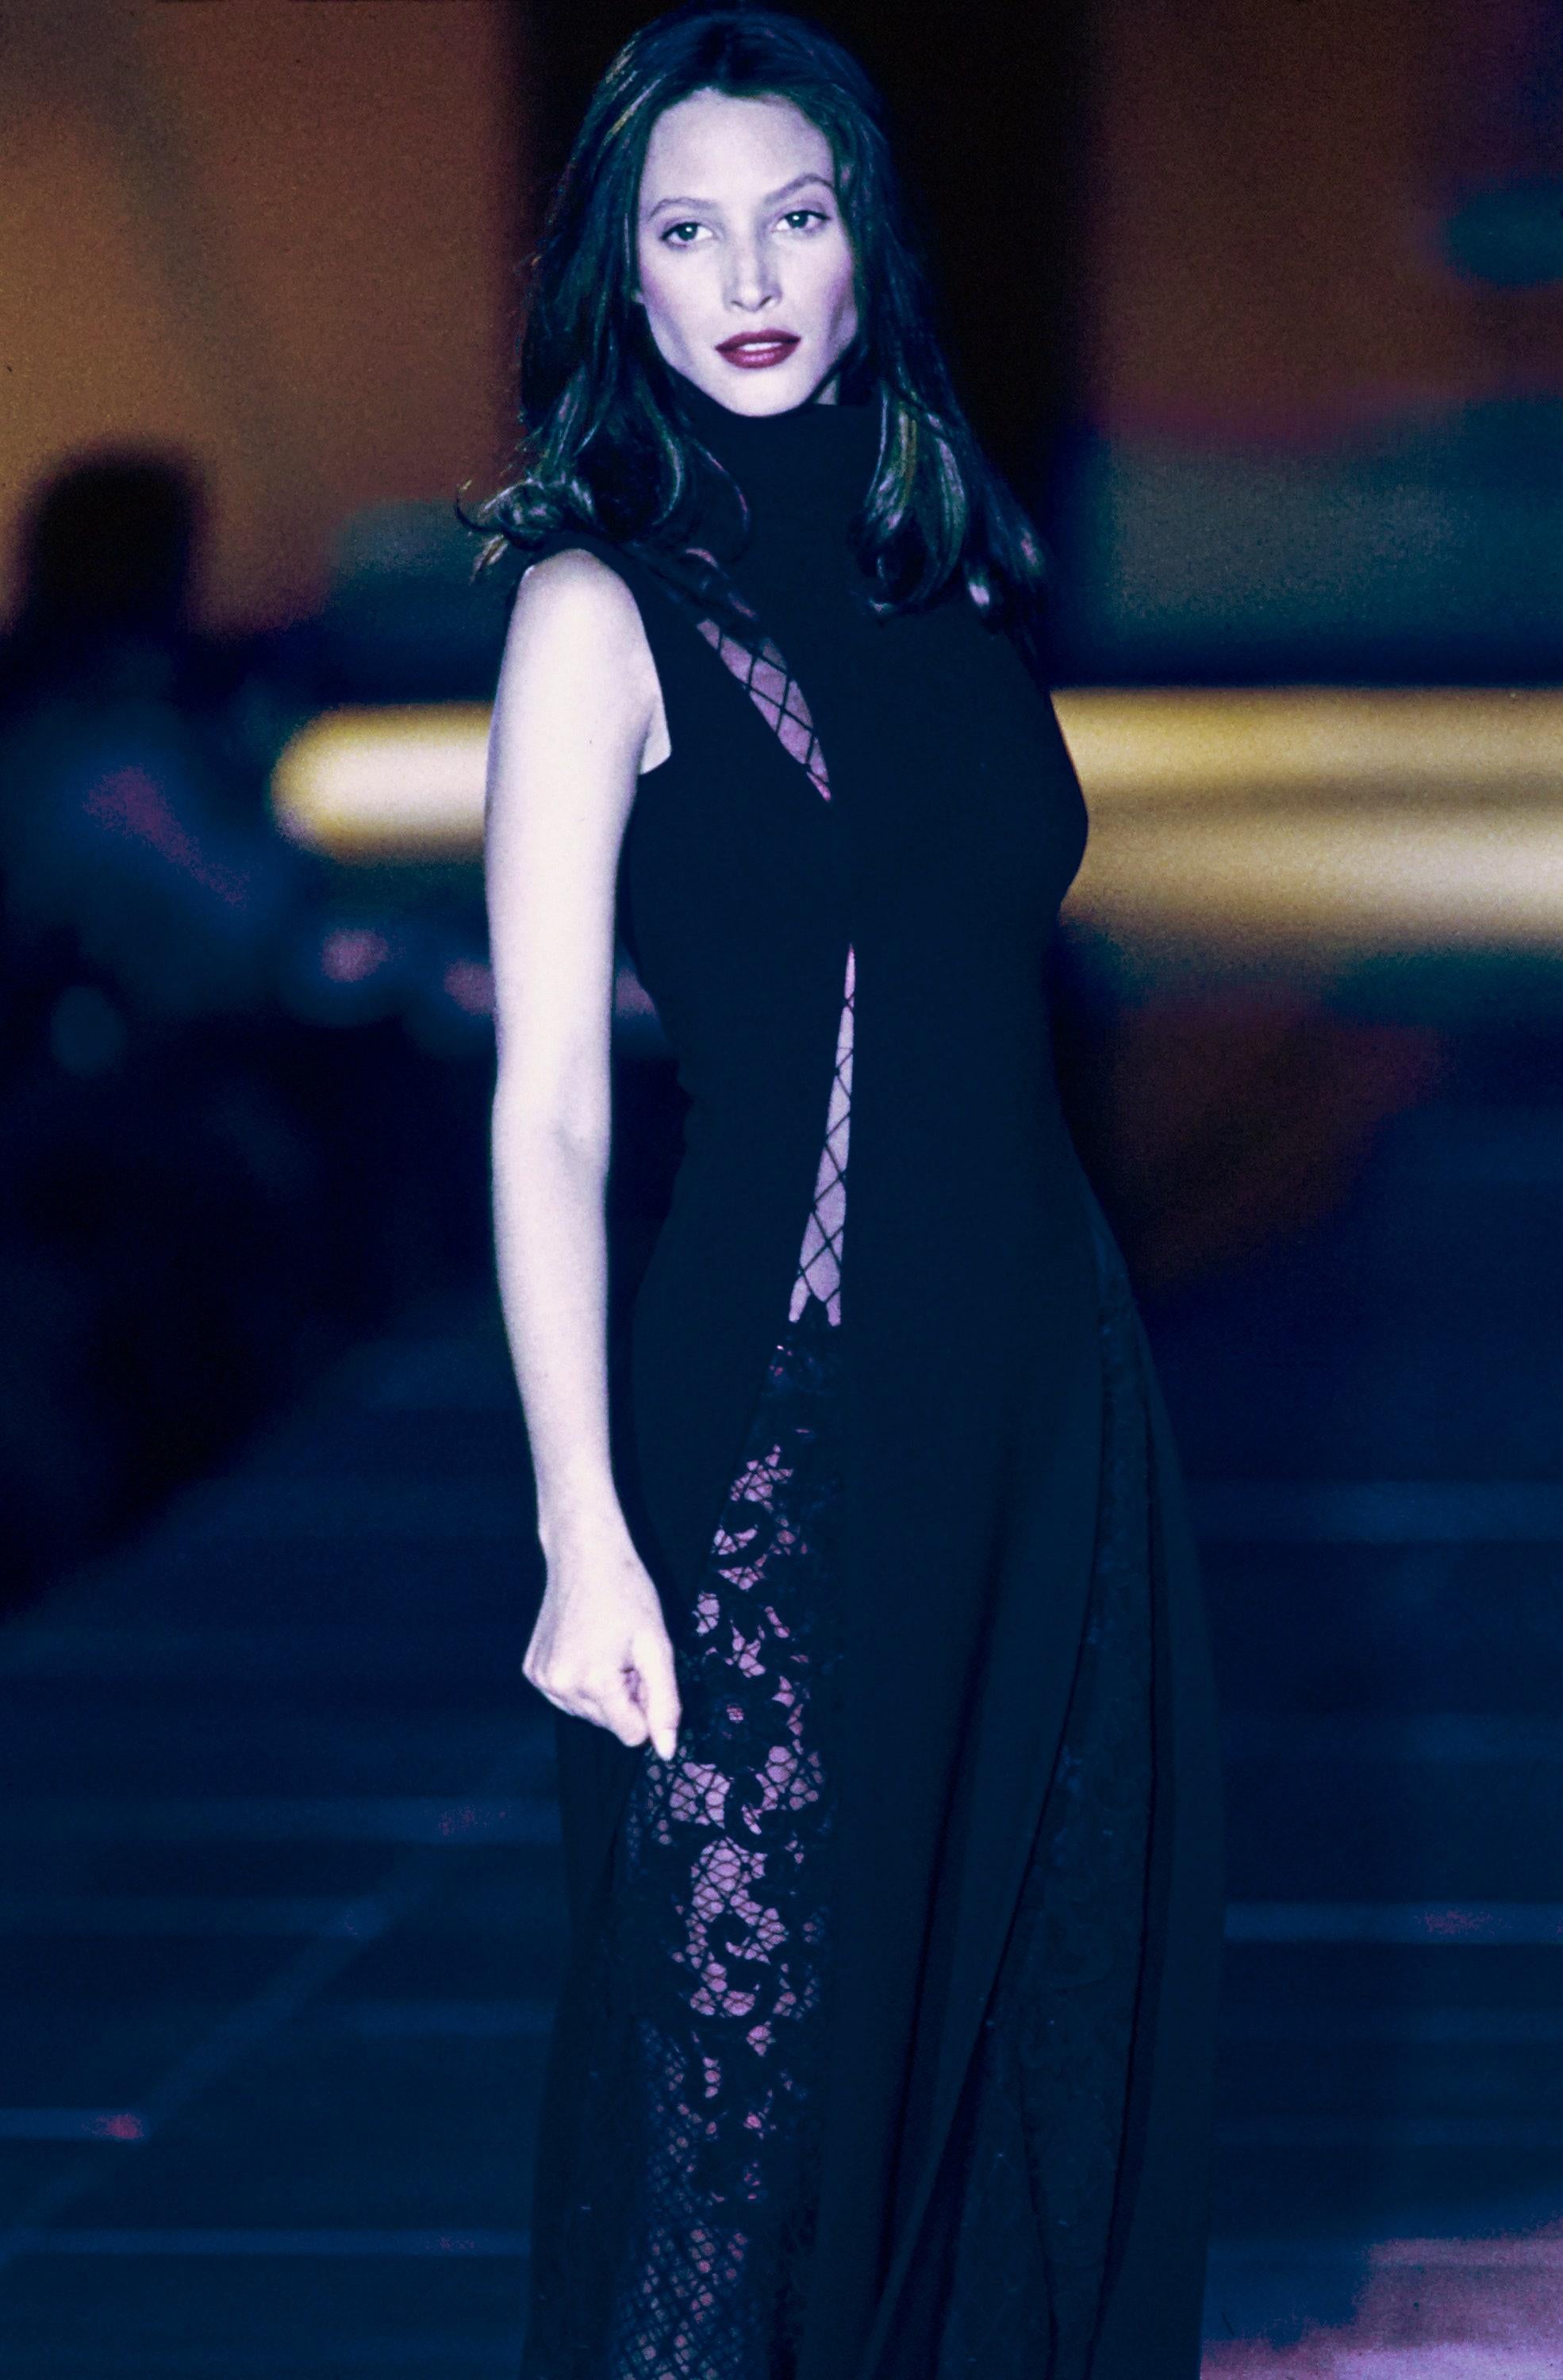 Gianni Versace black wool maxi dress with triangle lace cut outs and high leg slits

Fall-Winter 1993